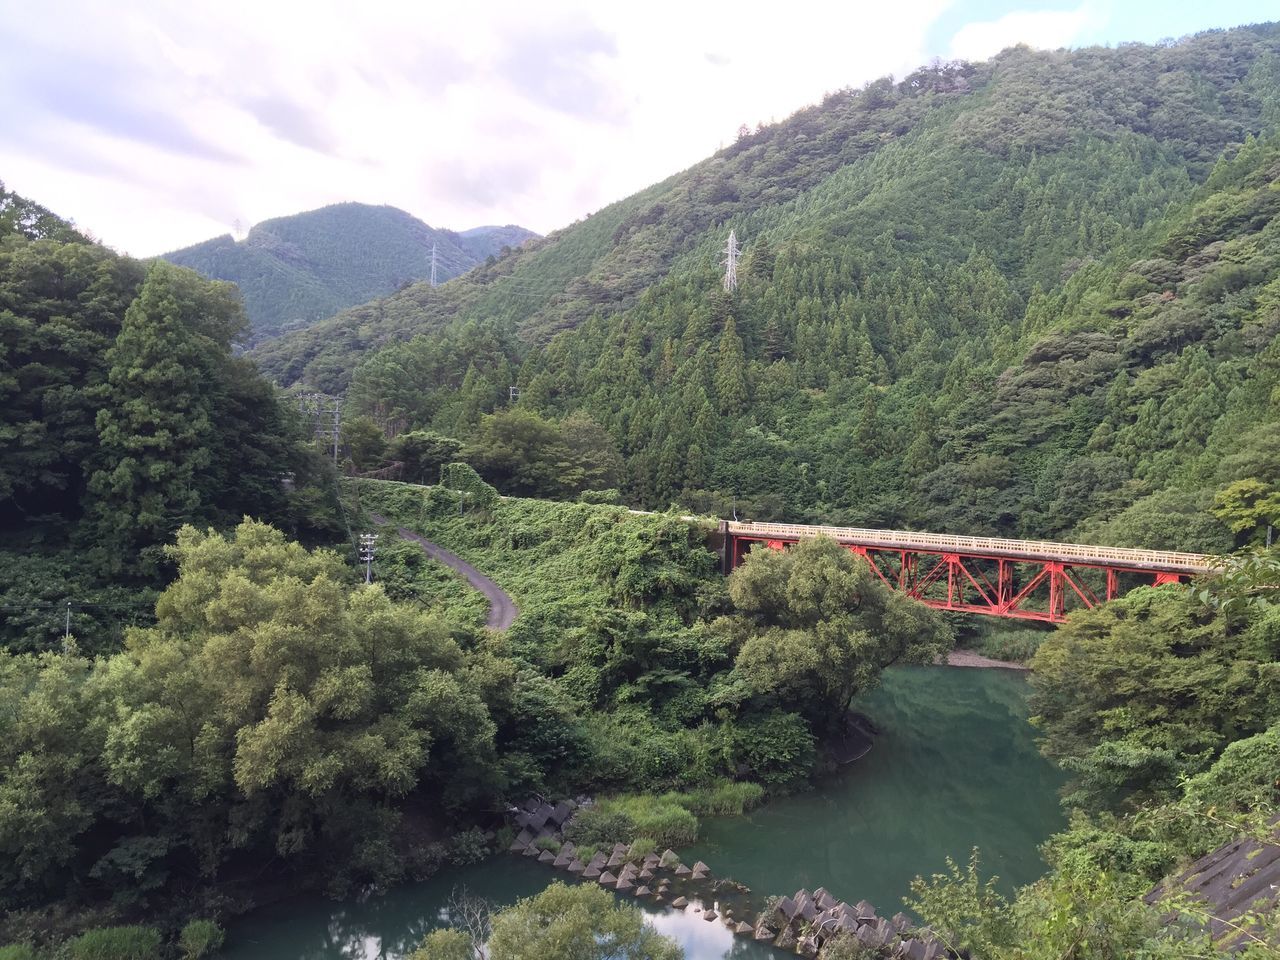 mountain, connection, bridge - man made structure, scenics, tree, sky, beauty in nature, tranquil scene, bridge, nature, tranquility, water, river, cloud - sky, day, mountain range, non-urban scene, outdoors, growth, lush foliage, green color, tourism, no people